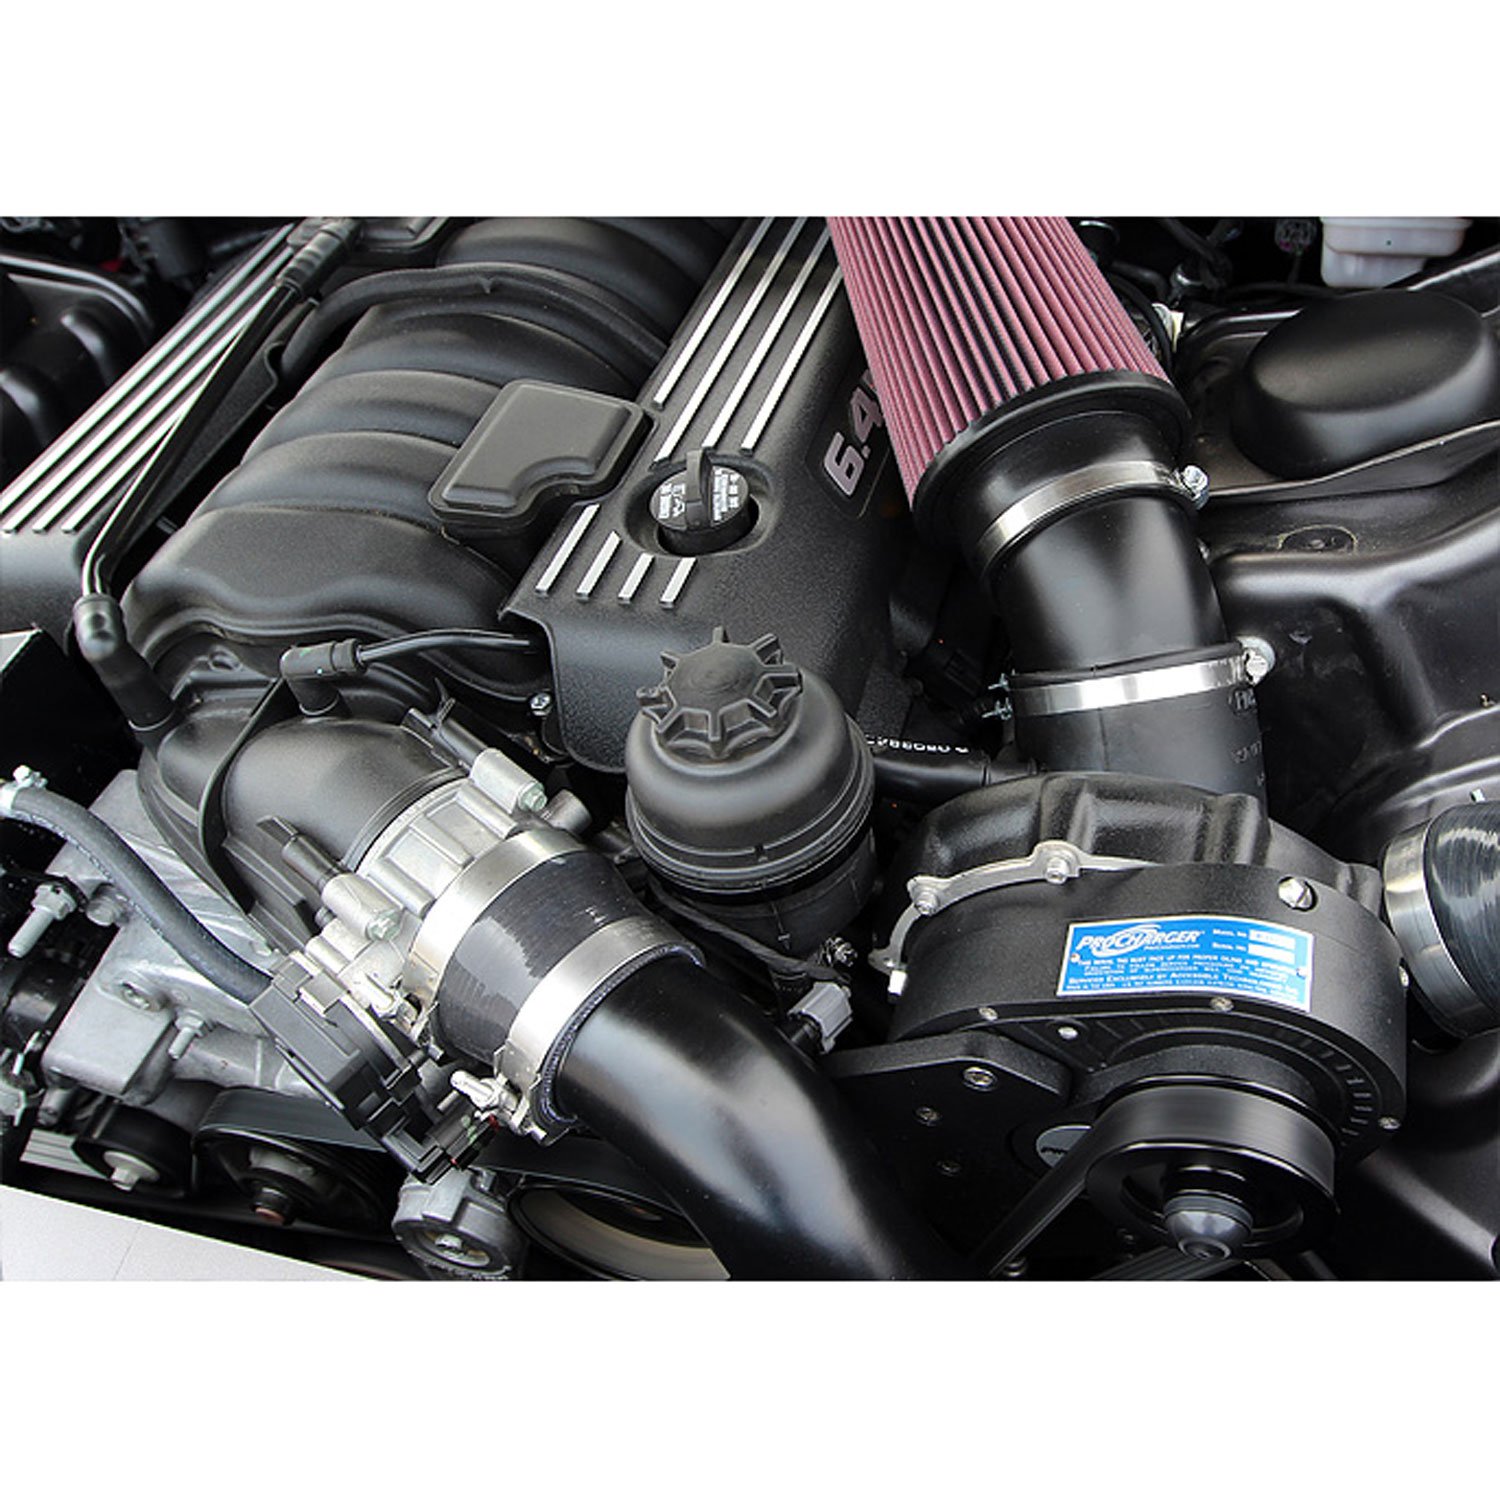 High Output Intercooled Supercharger System P-1X Dodge Challenger 6.4L Hemi Manual